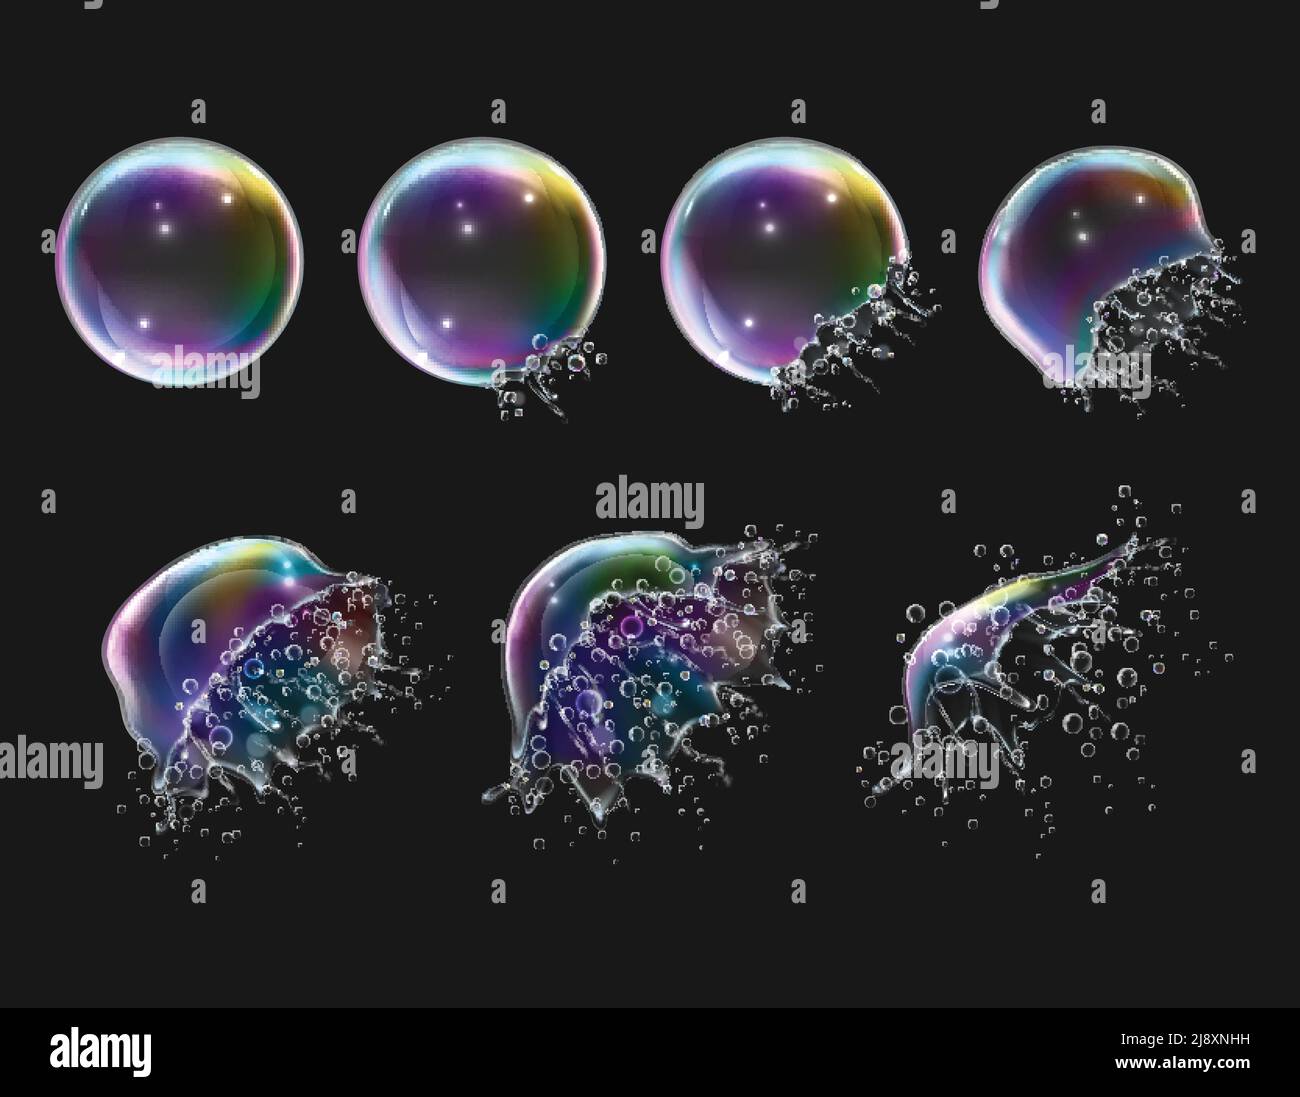 Explosion stages of realistic glossy round rainbow soap bubbles on black background isolated vector illustration Stock Vector